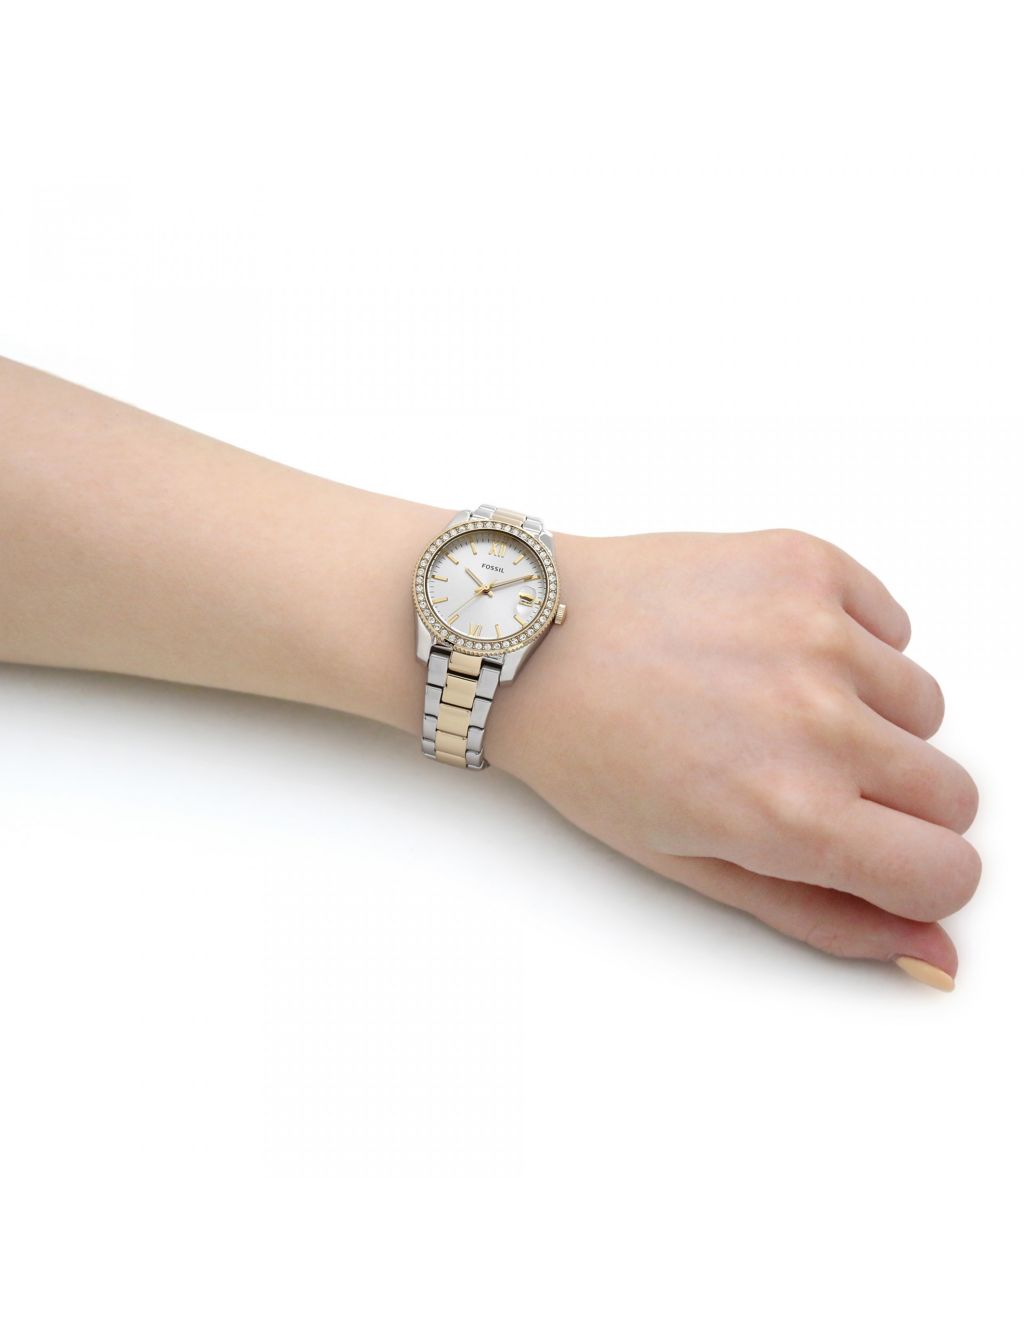 Fossil Scarlette Stainless Steel Watch image 2